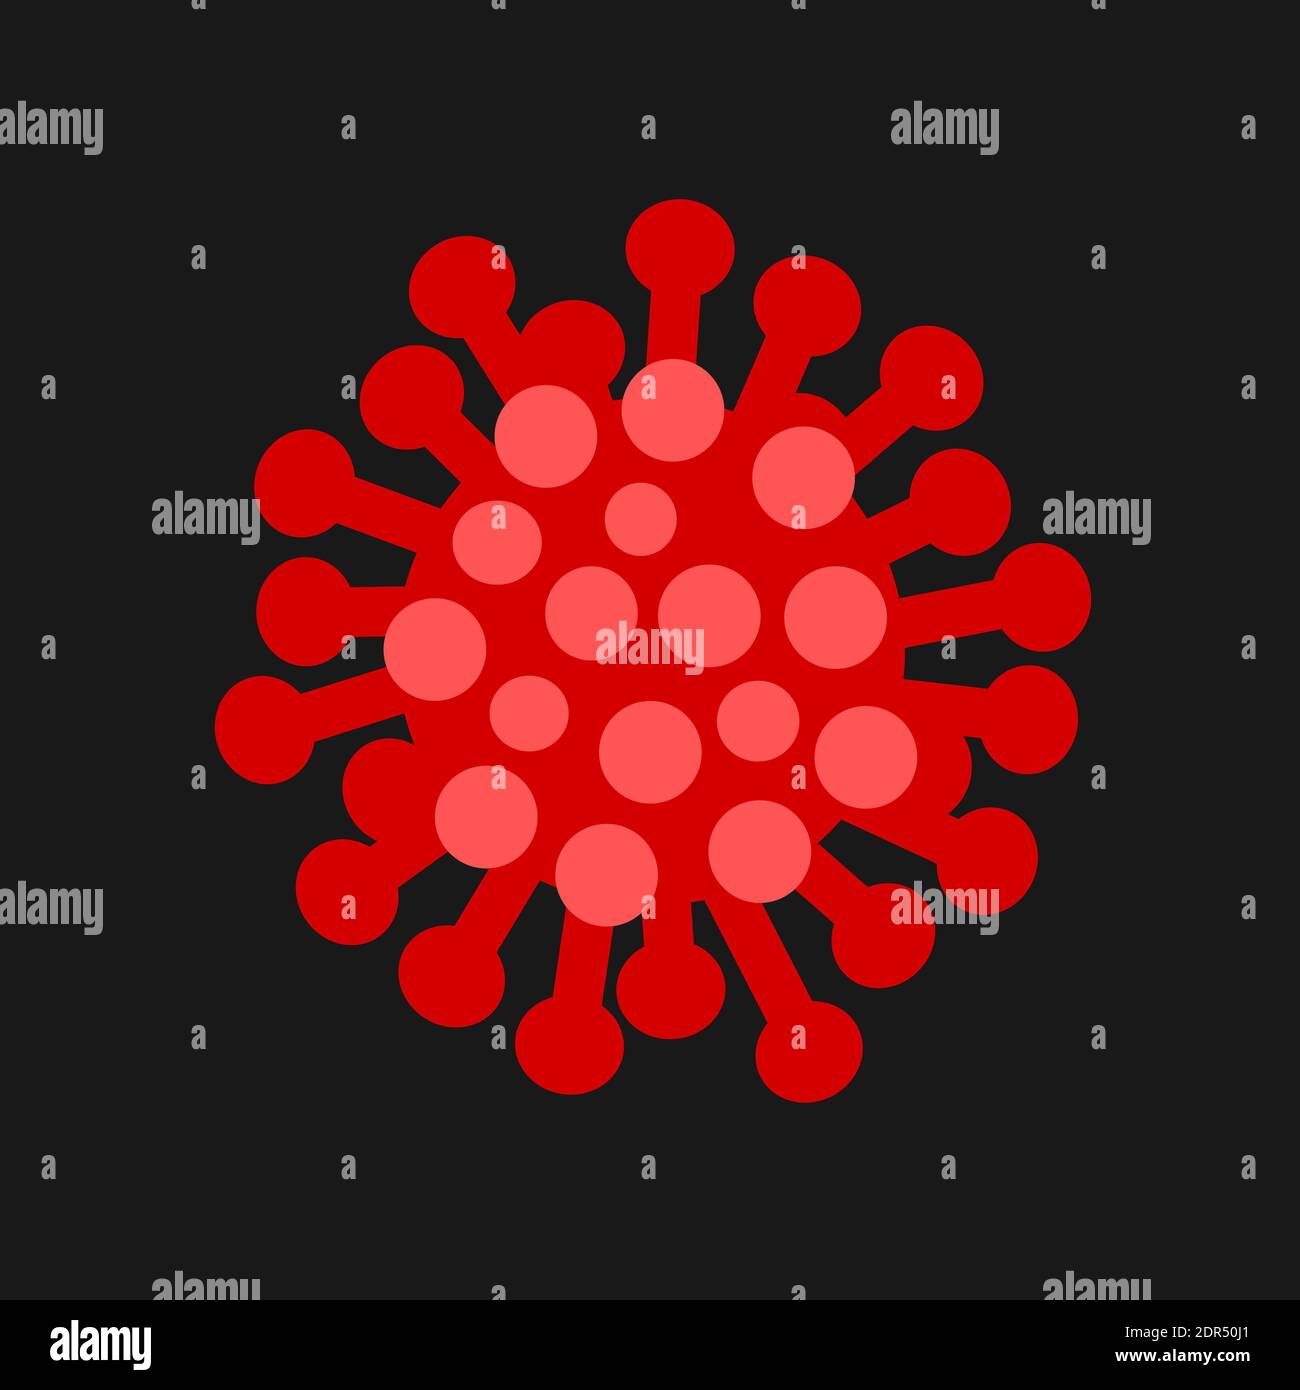 Virion - microscopic particle of virus. Red microorganism and organism. Vector illustration isolated on black. Stock Photo